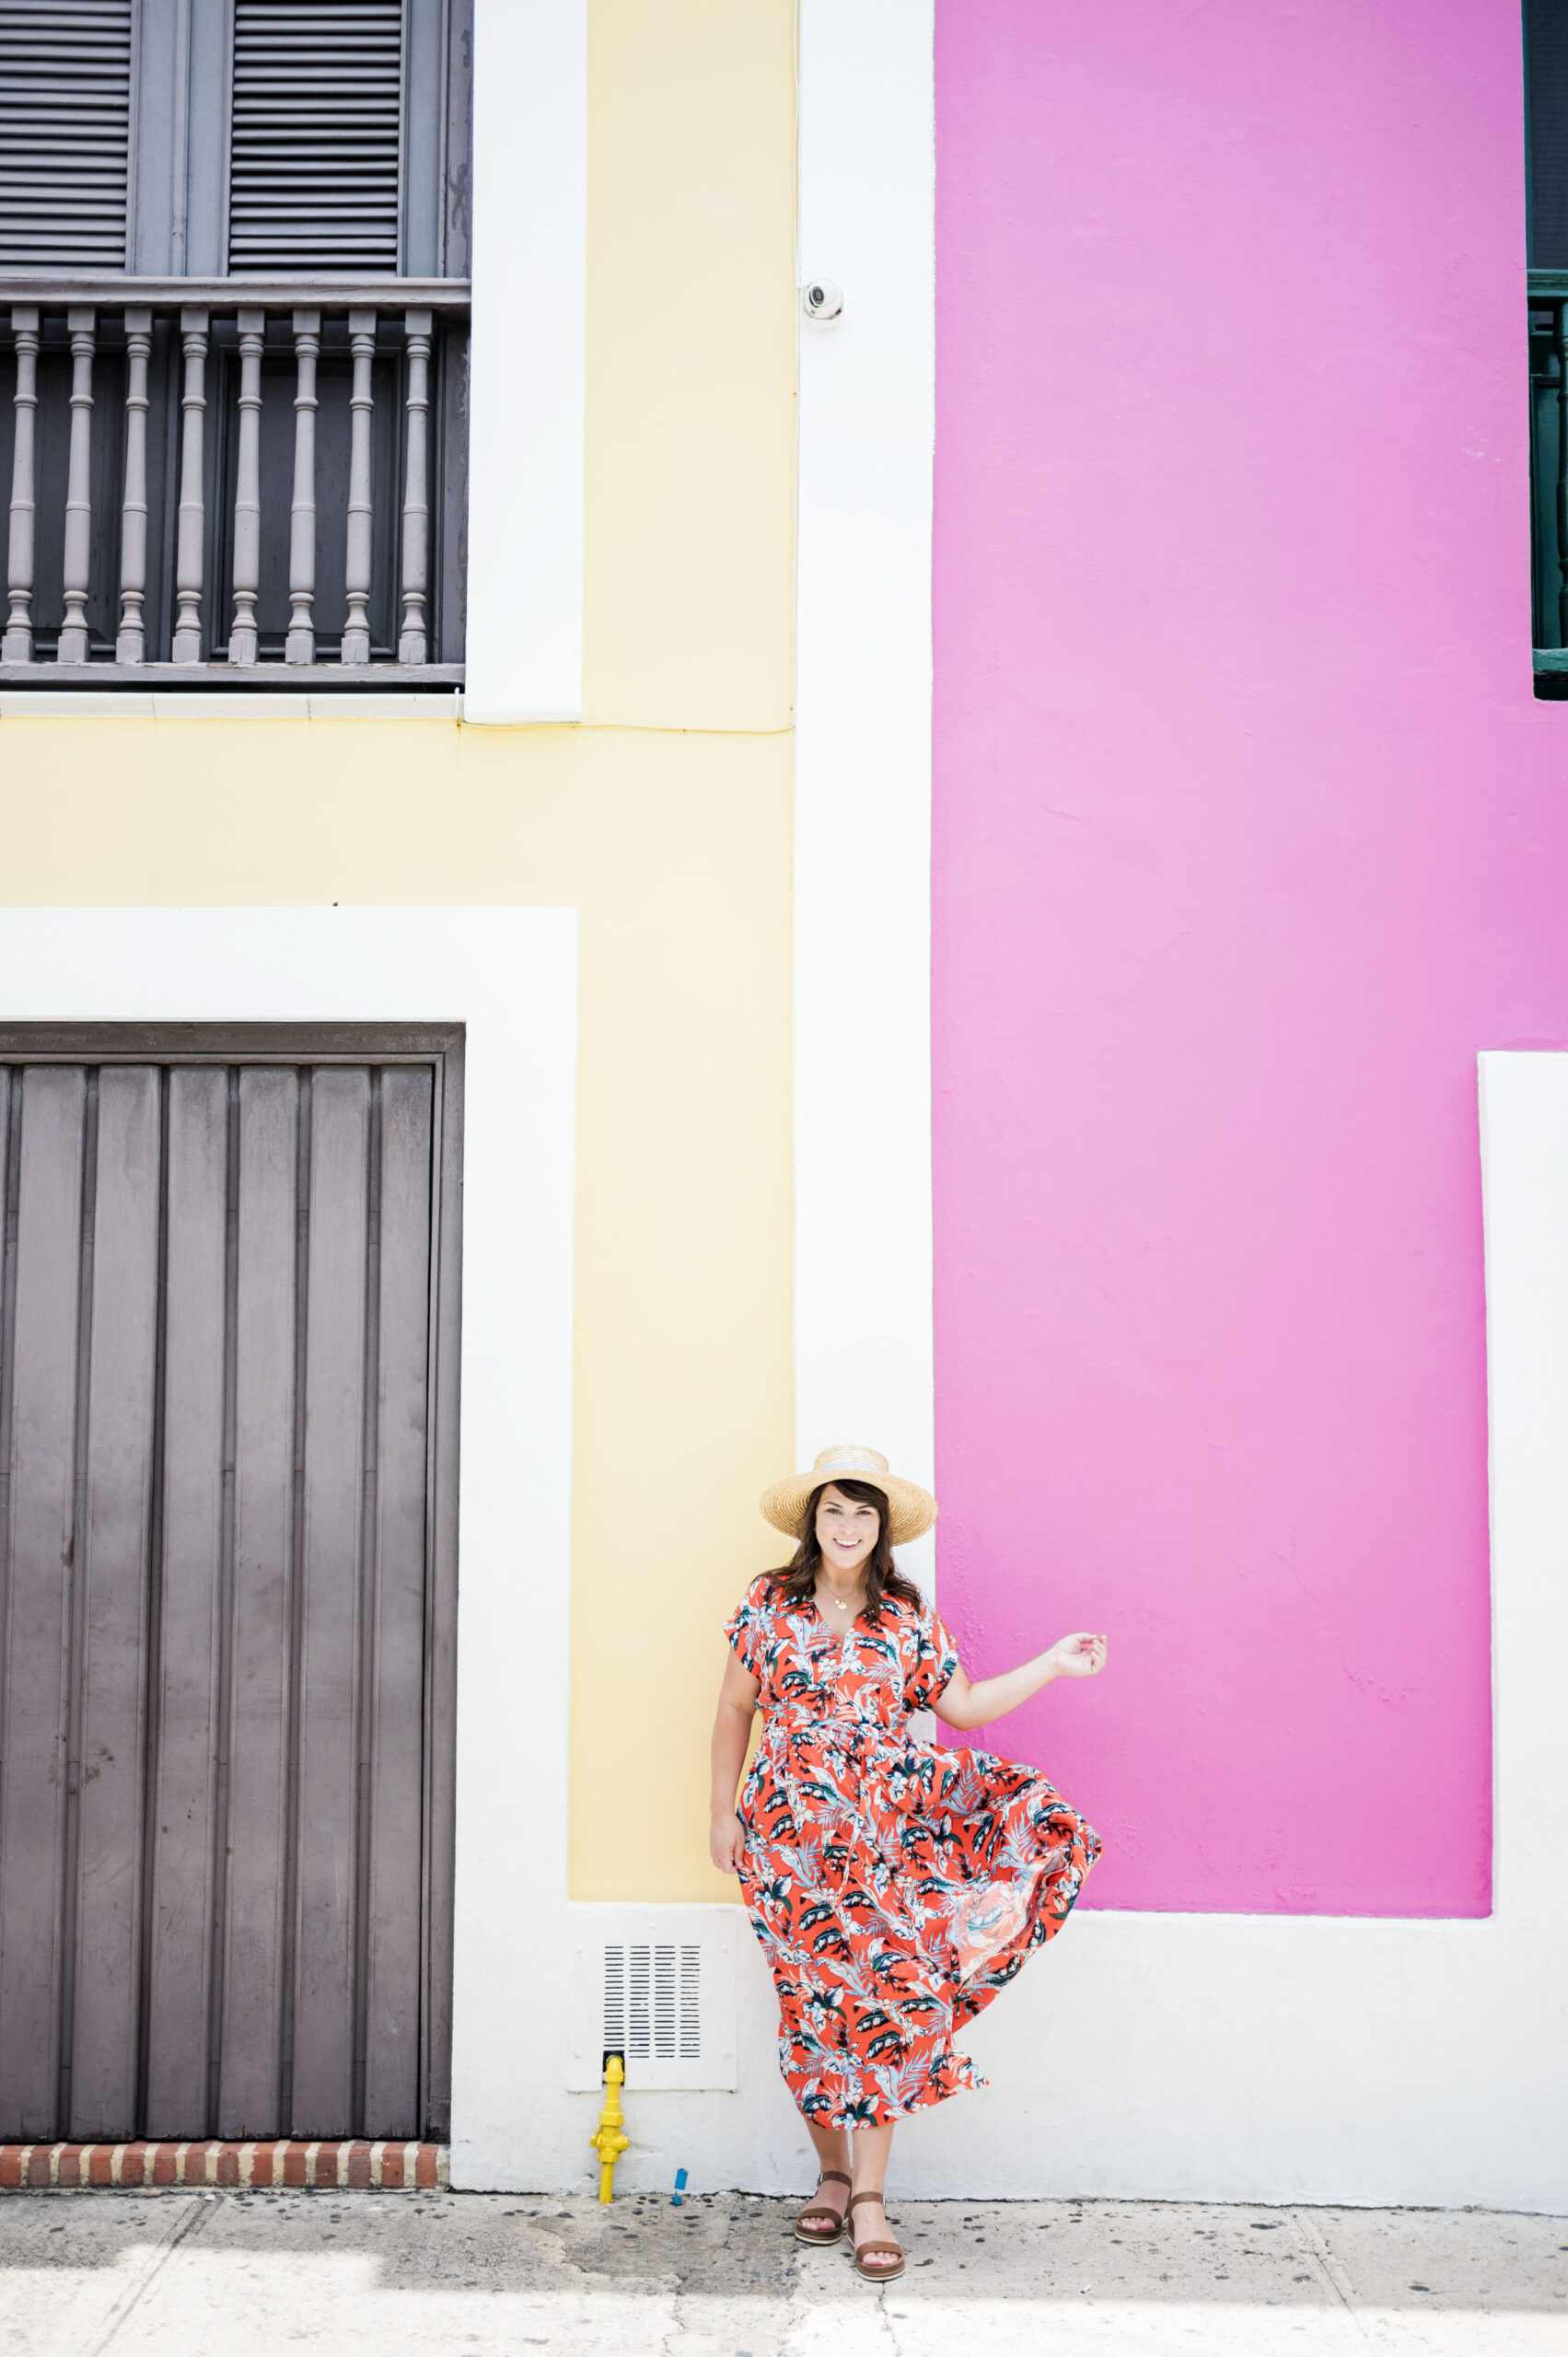 yellow and pink wall, female in front tossing dress skirt in air